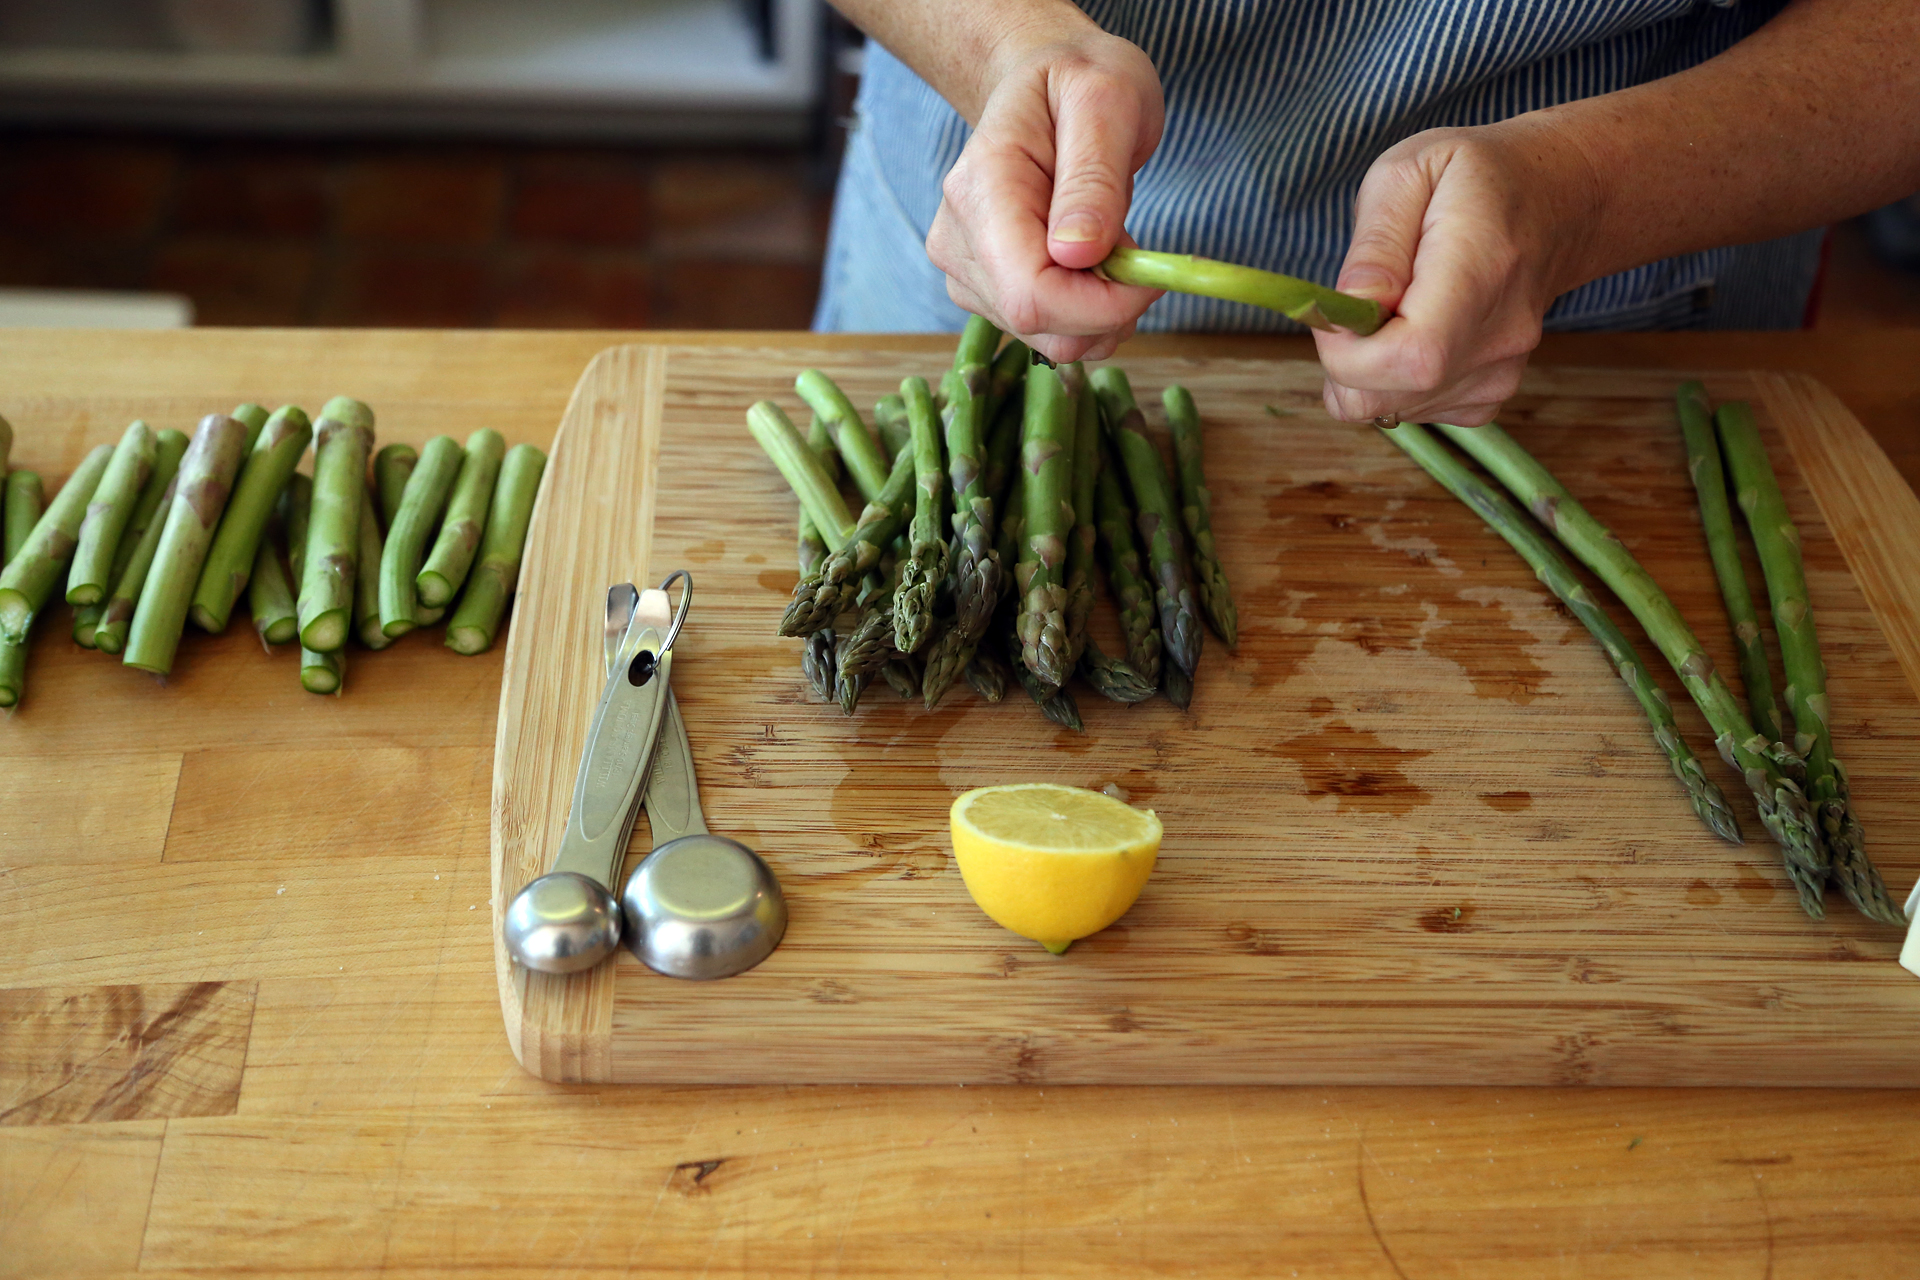 Snap off the tough ends of the asparagus before roasting.